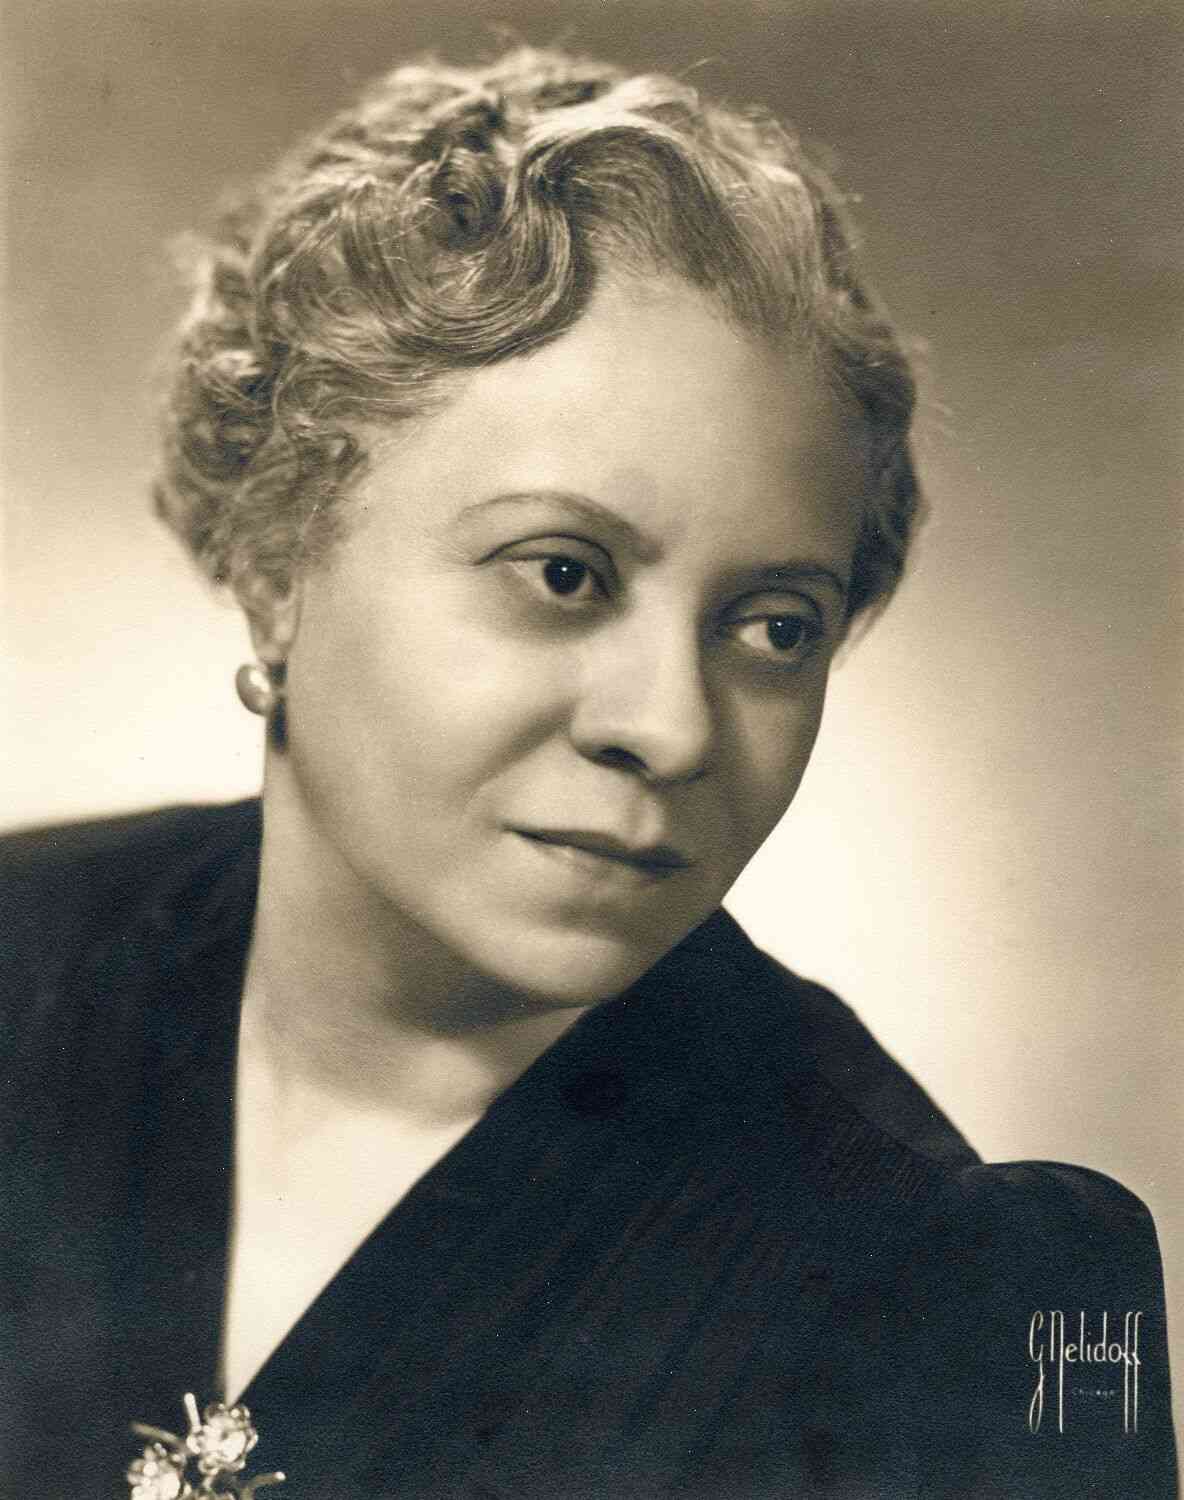 Florence Price: A Jazz Singer, a Jazz Singer, and a Musician